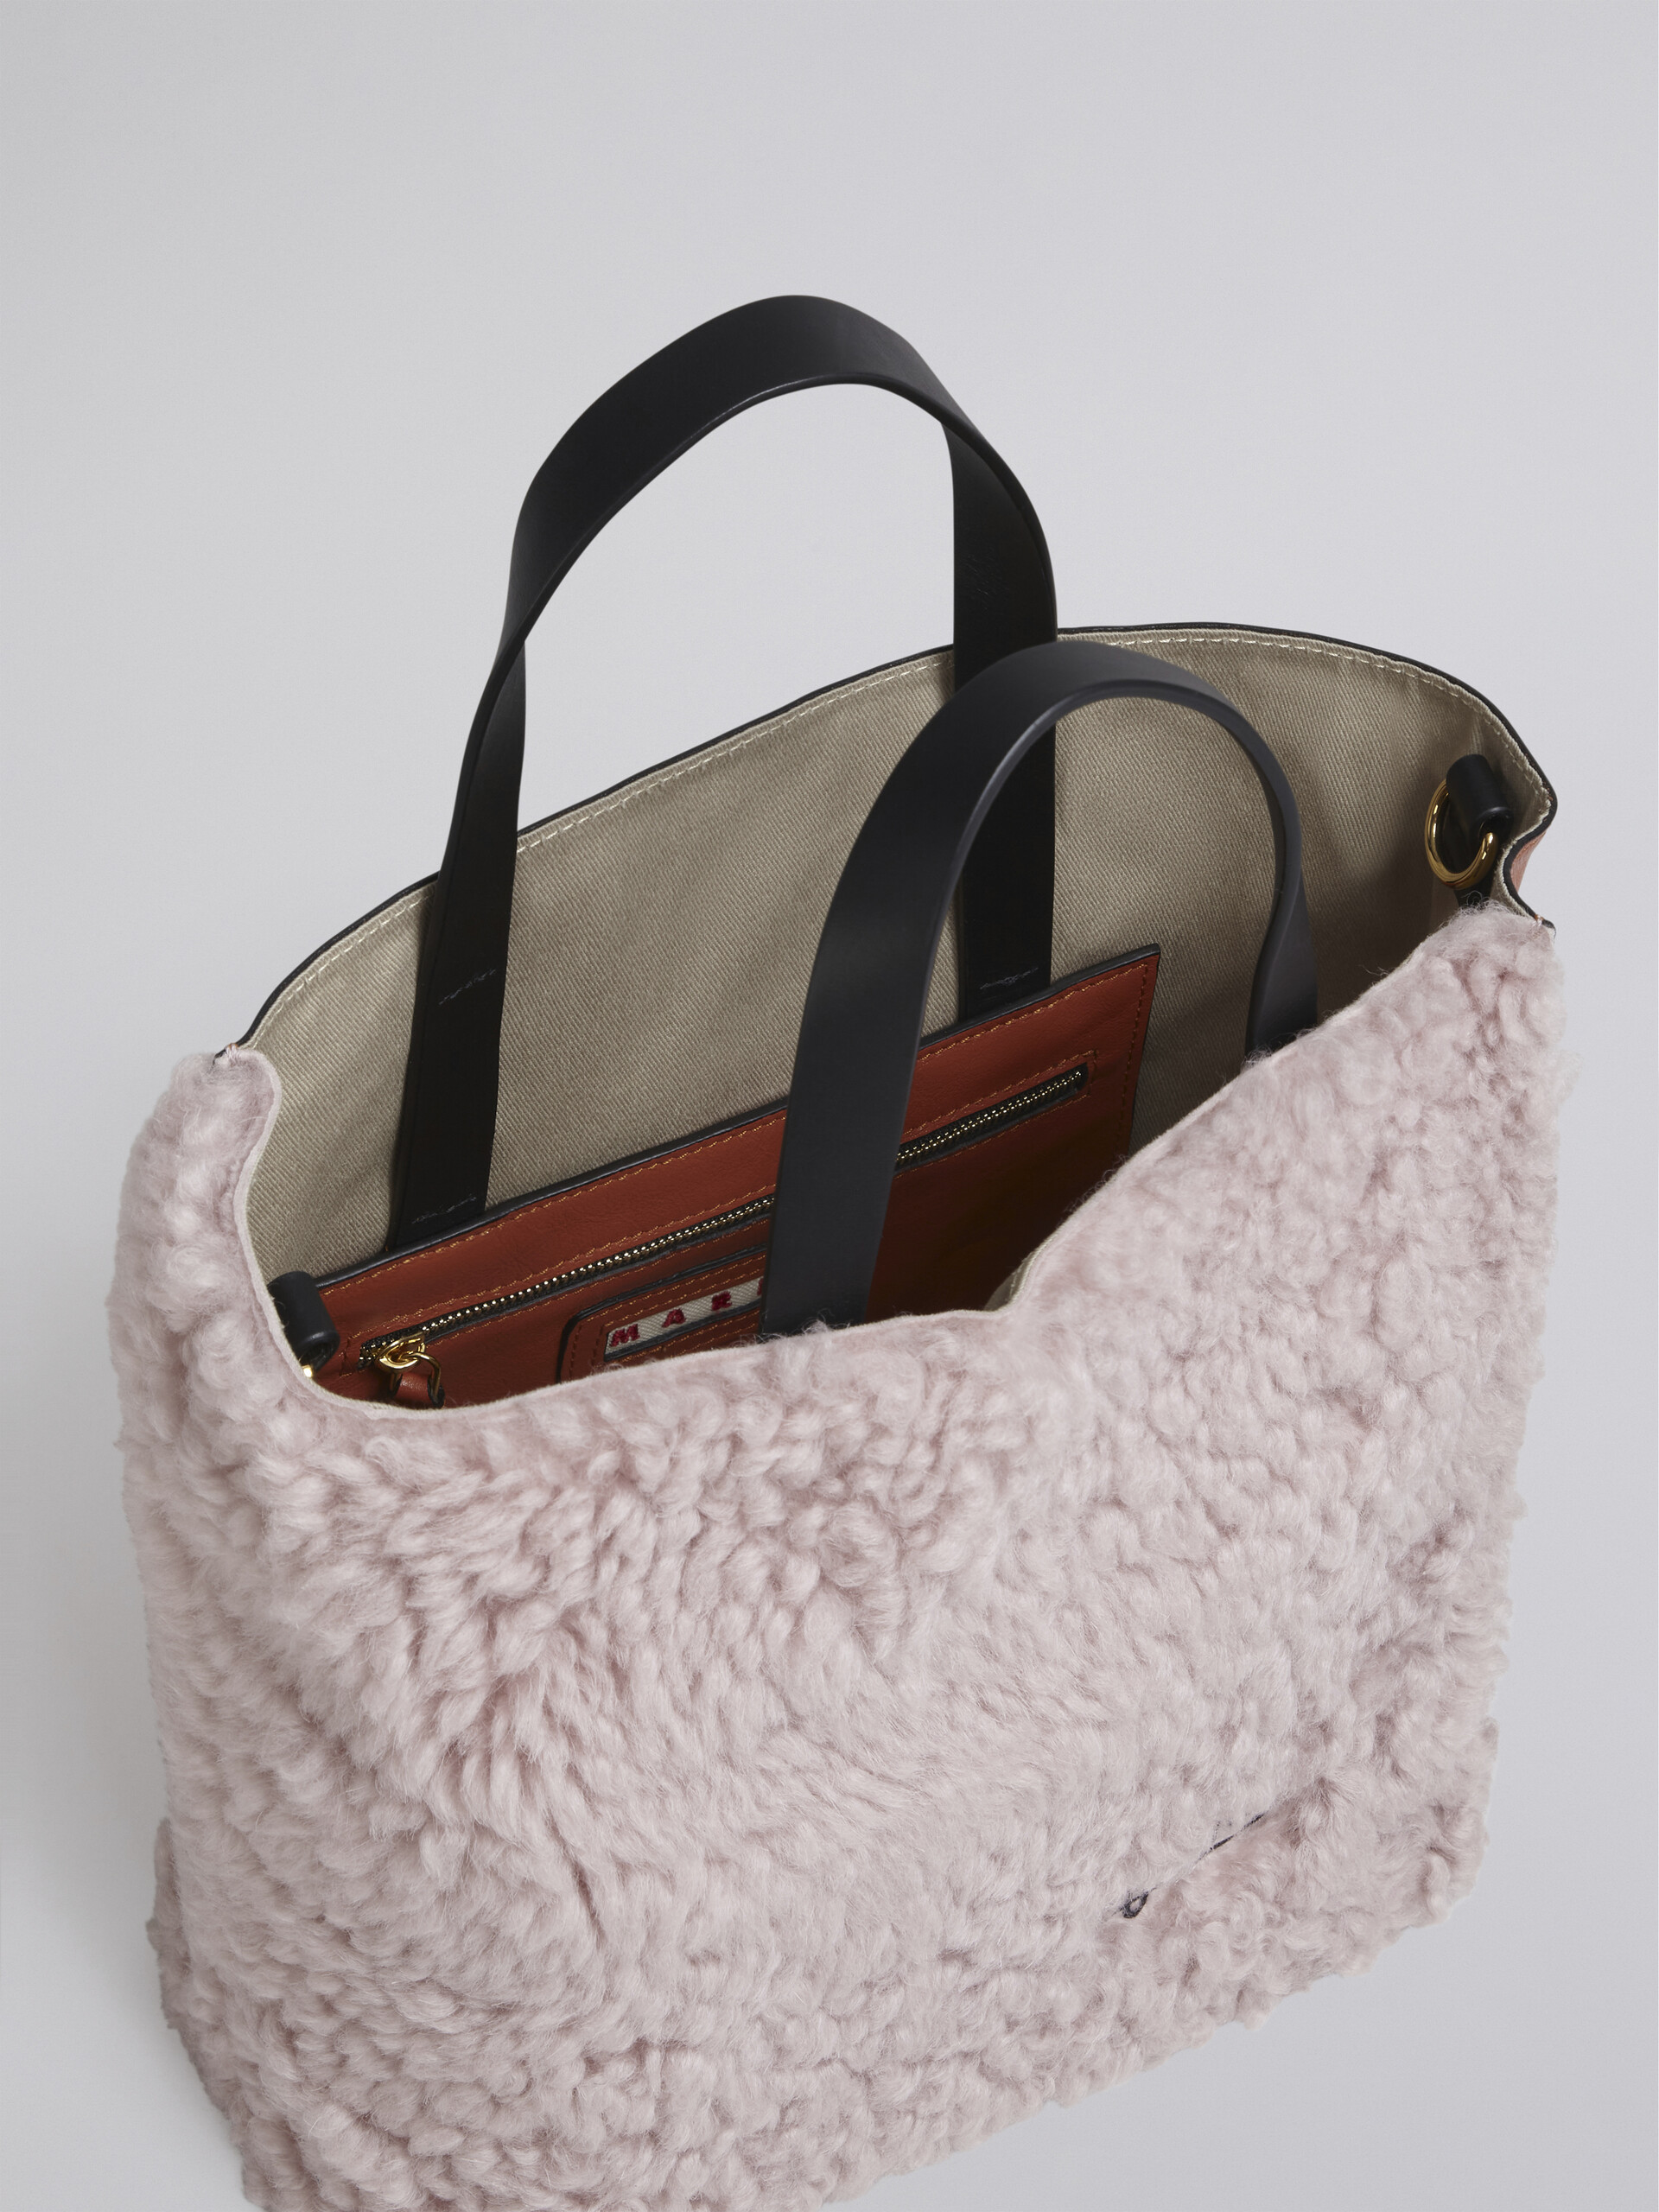 MUSEO SOFT bag in shearling and calfskin with embroidered logo - Shopping Bags - Image 2